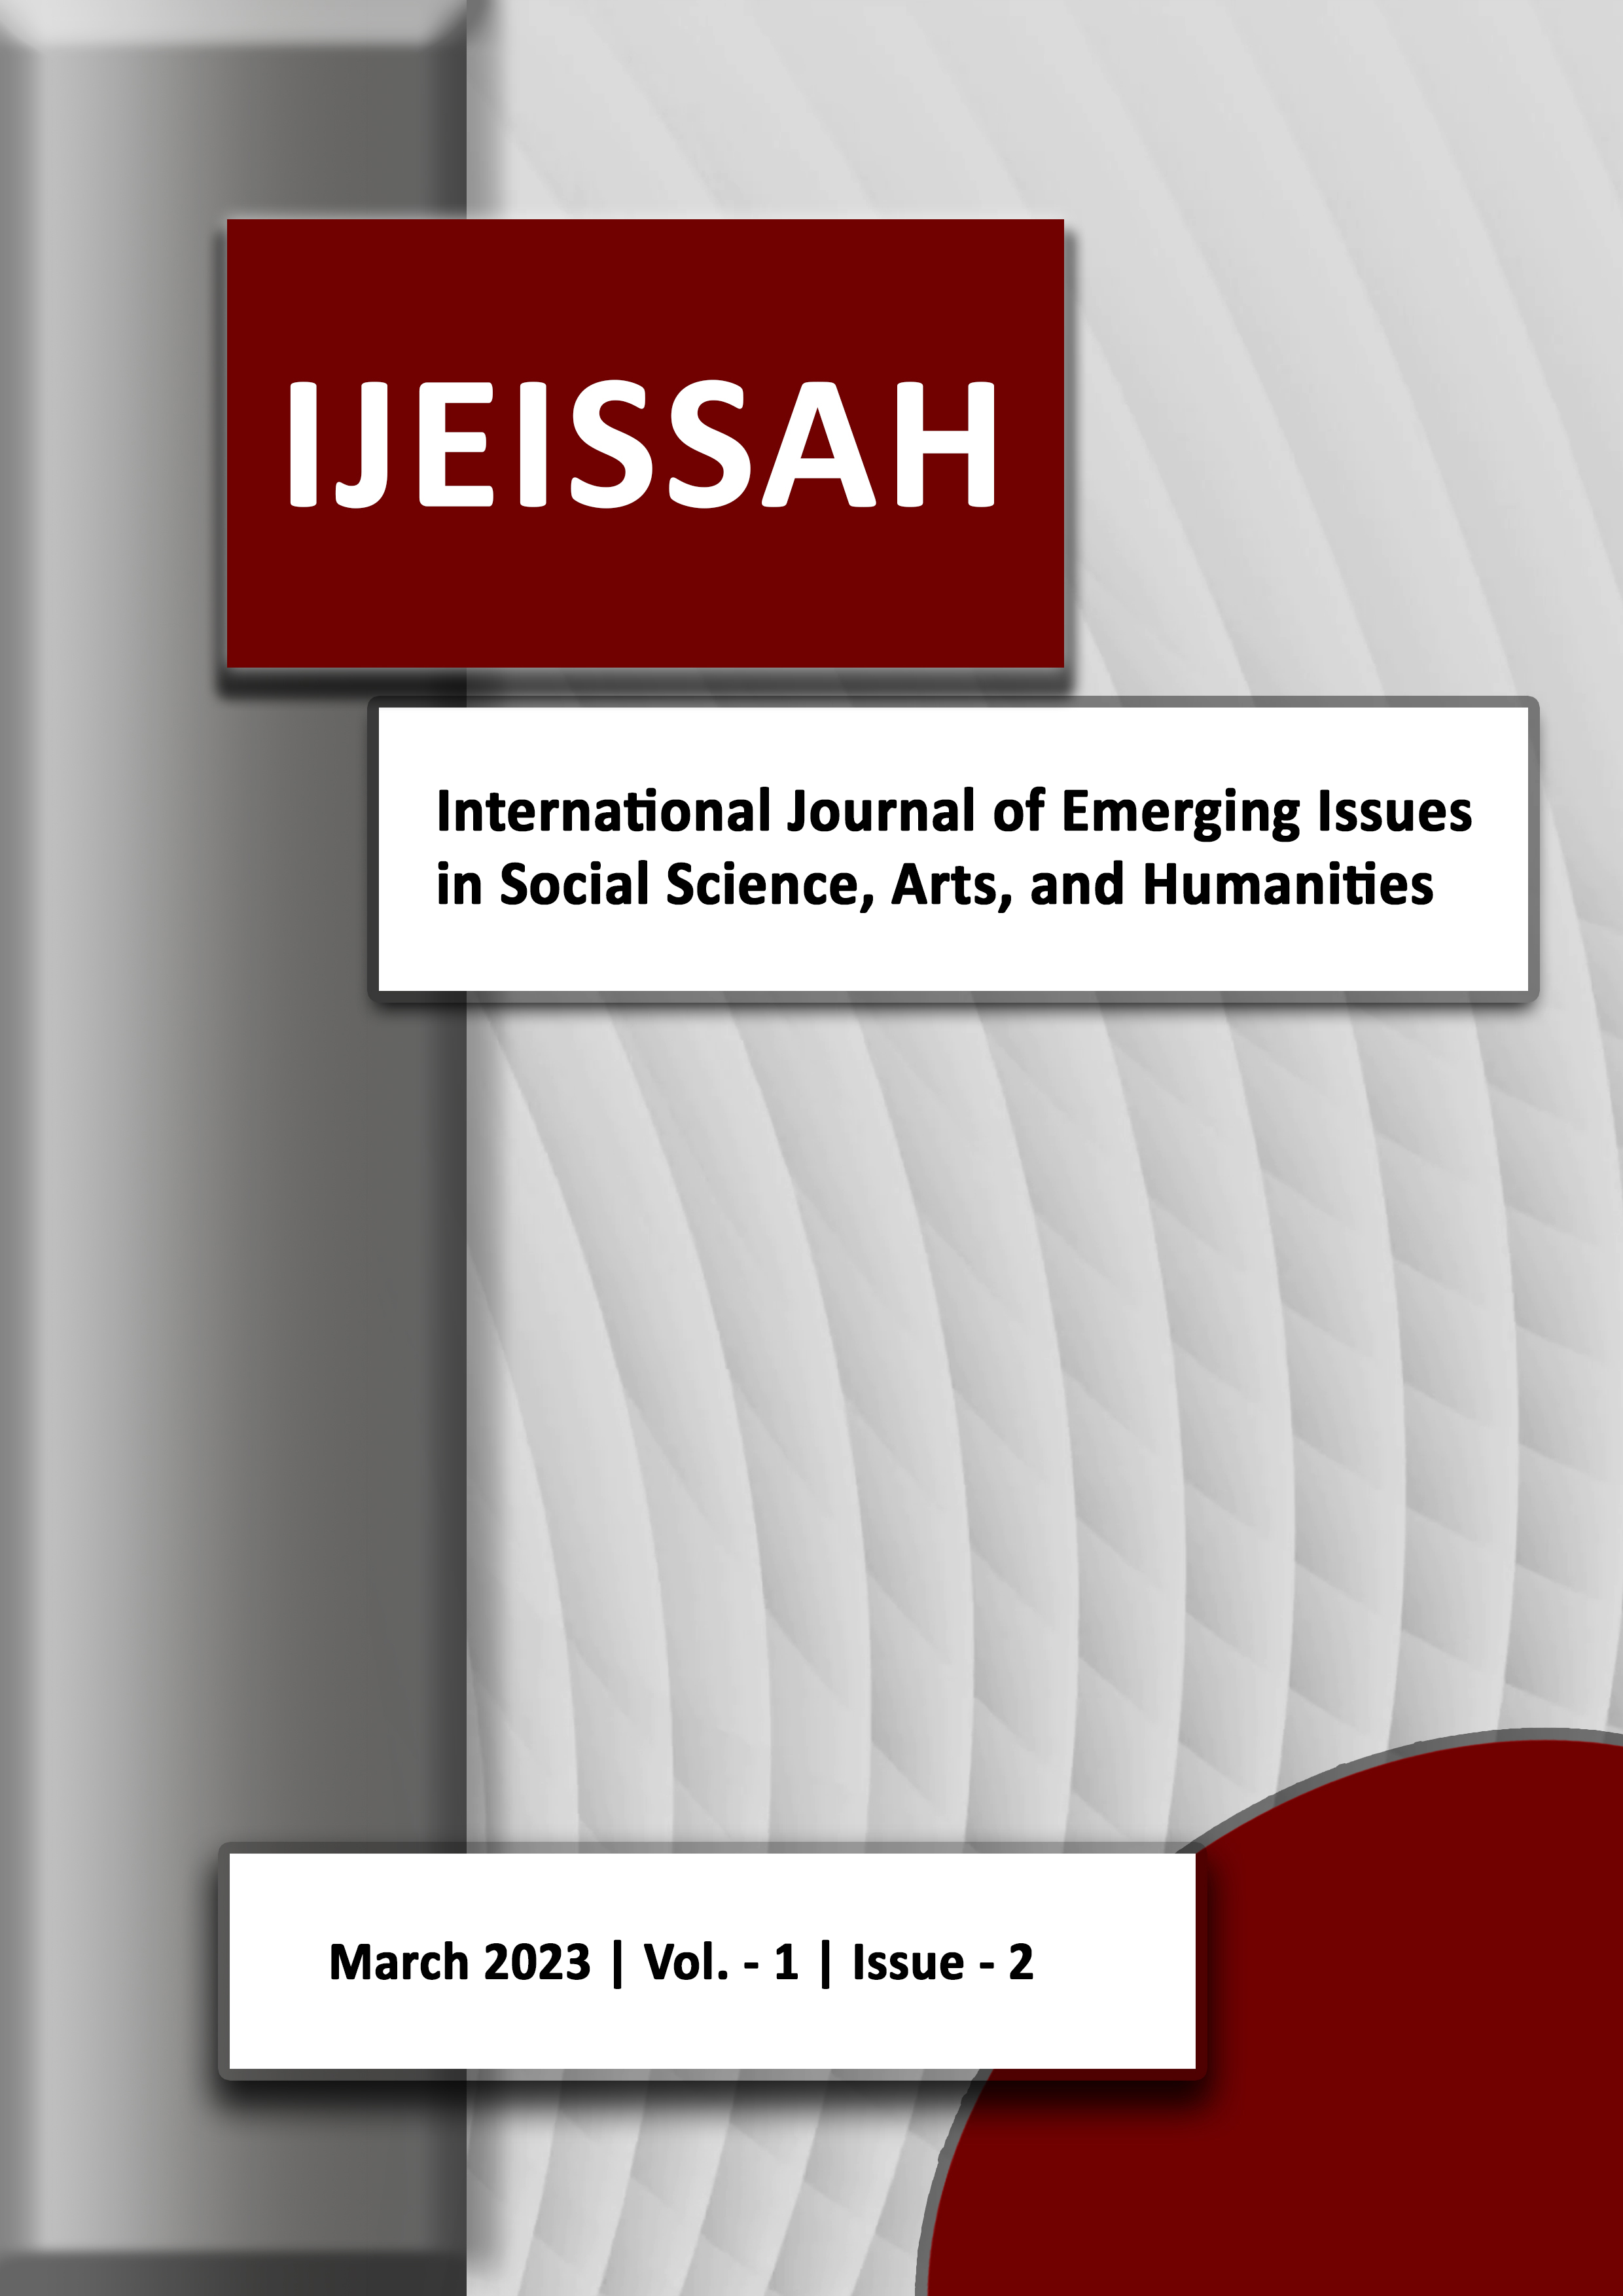 					View Vol. 1 No. 2 (2023): International Journal of Emerging Issues in Social Science, Arts, and Humanities (IJEISSAH)
				